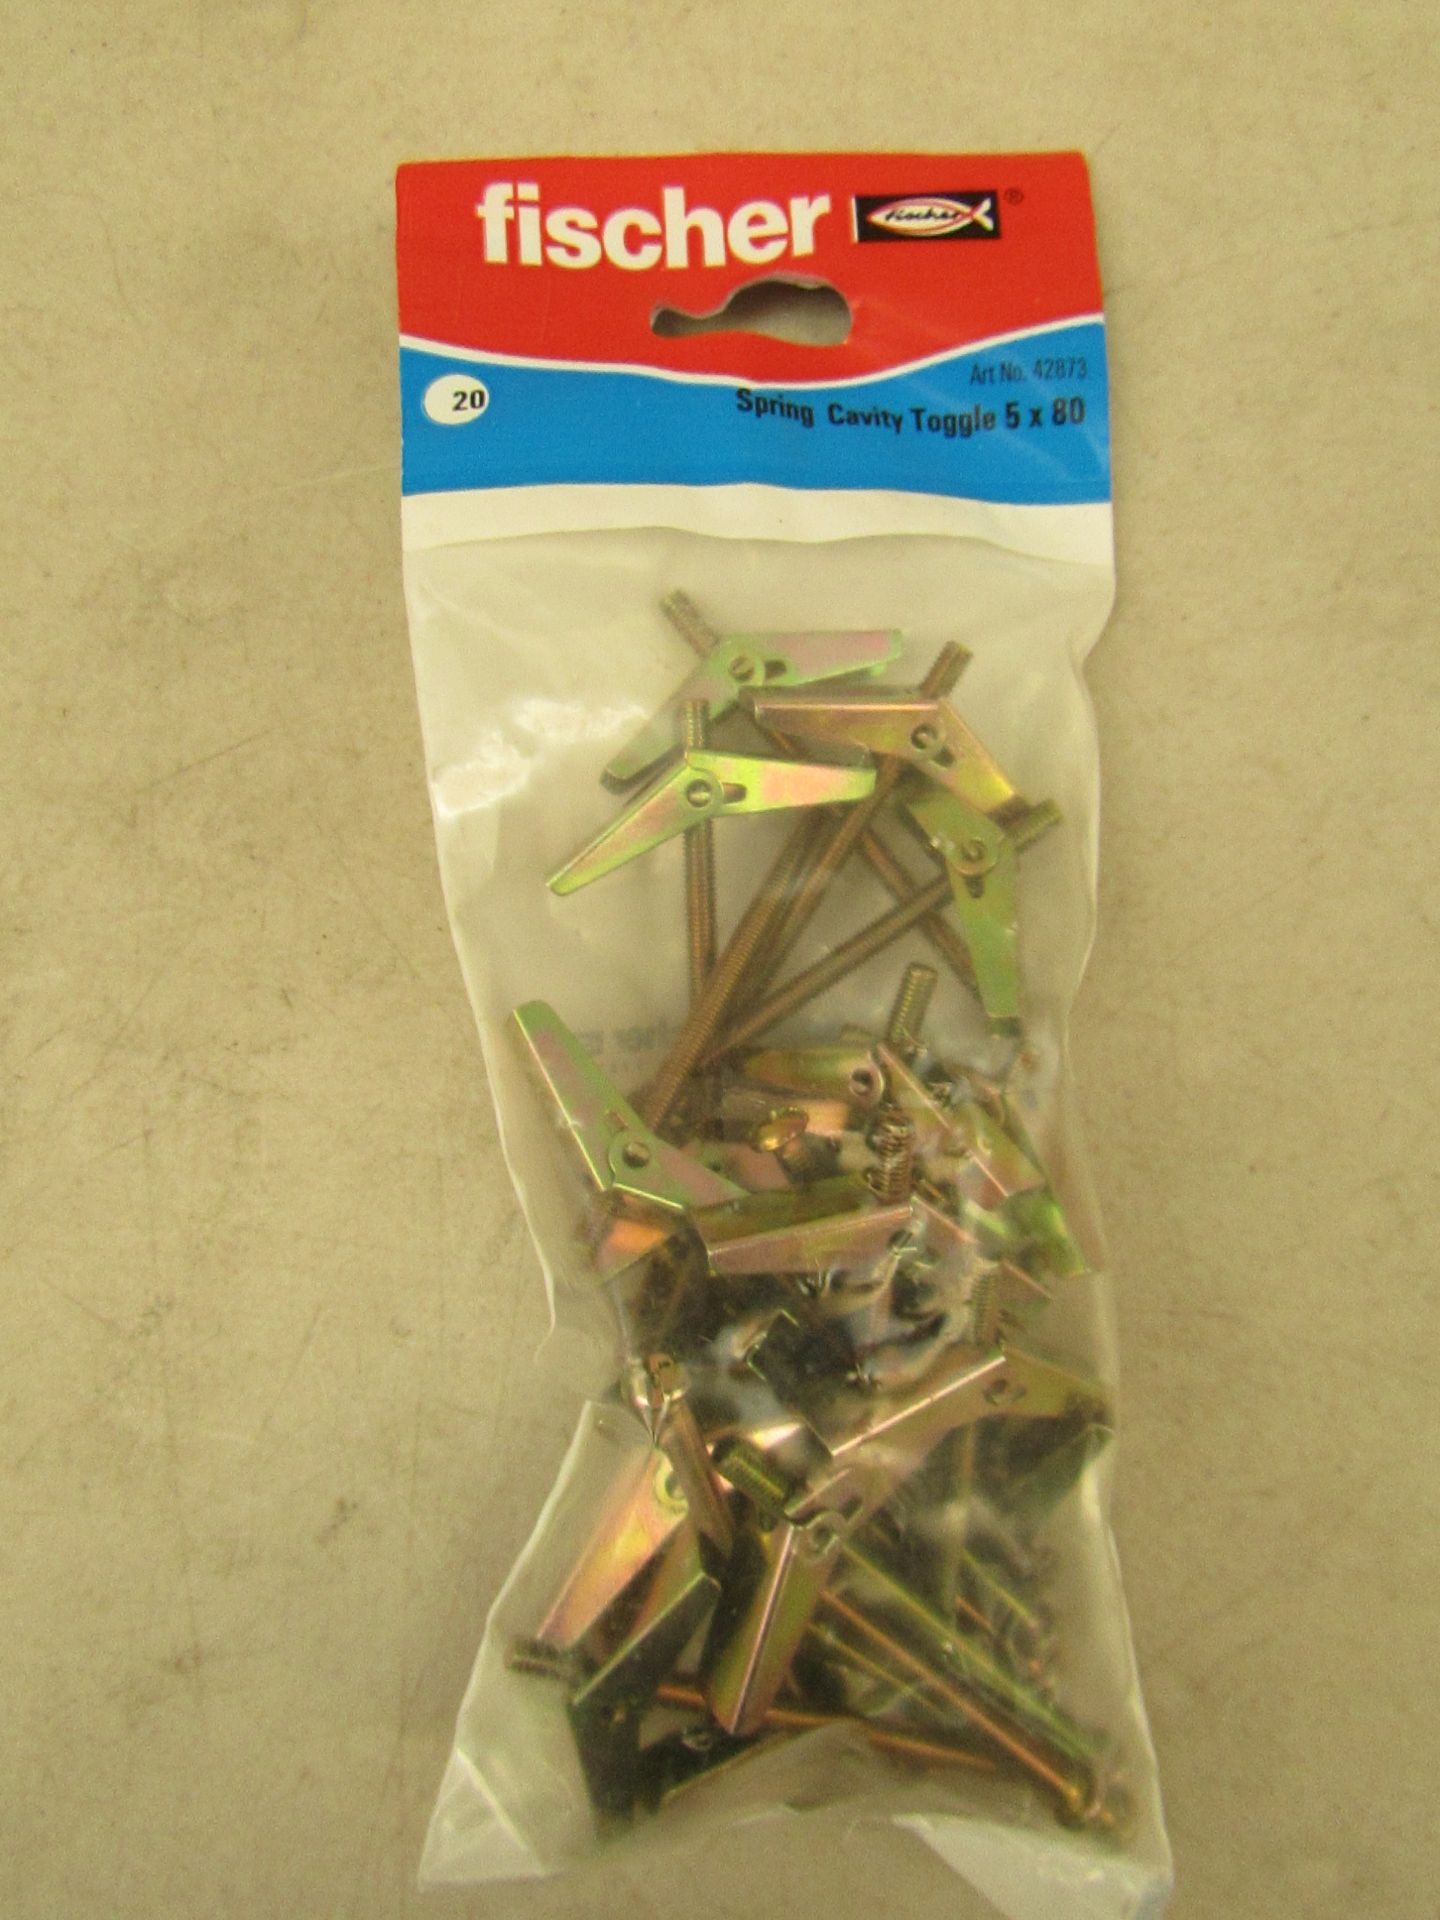 8x bags of 20 Fischer spring cavity toggle 5x80, new and in packaging.